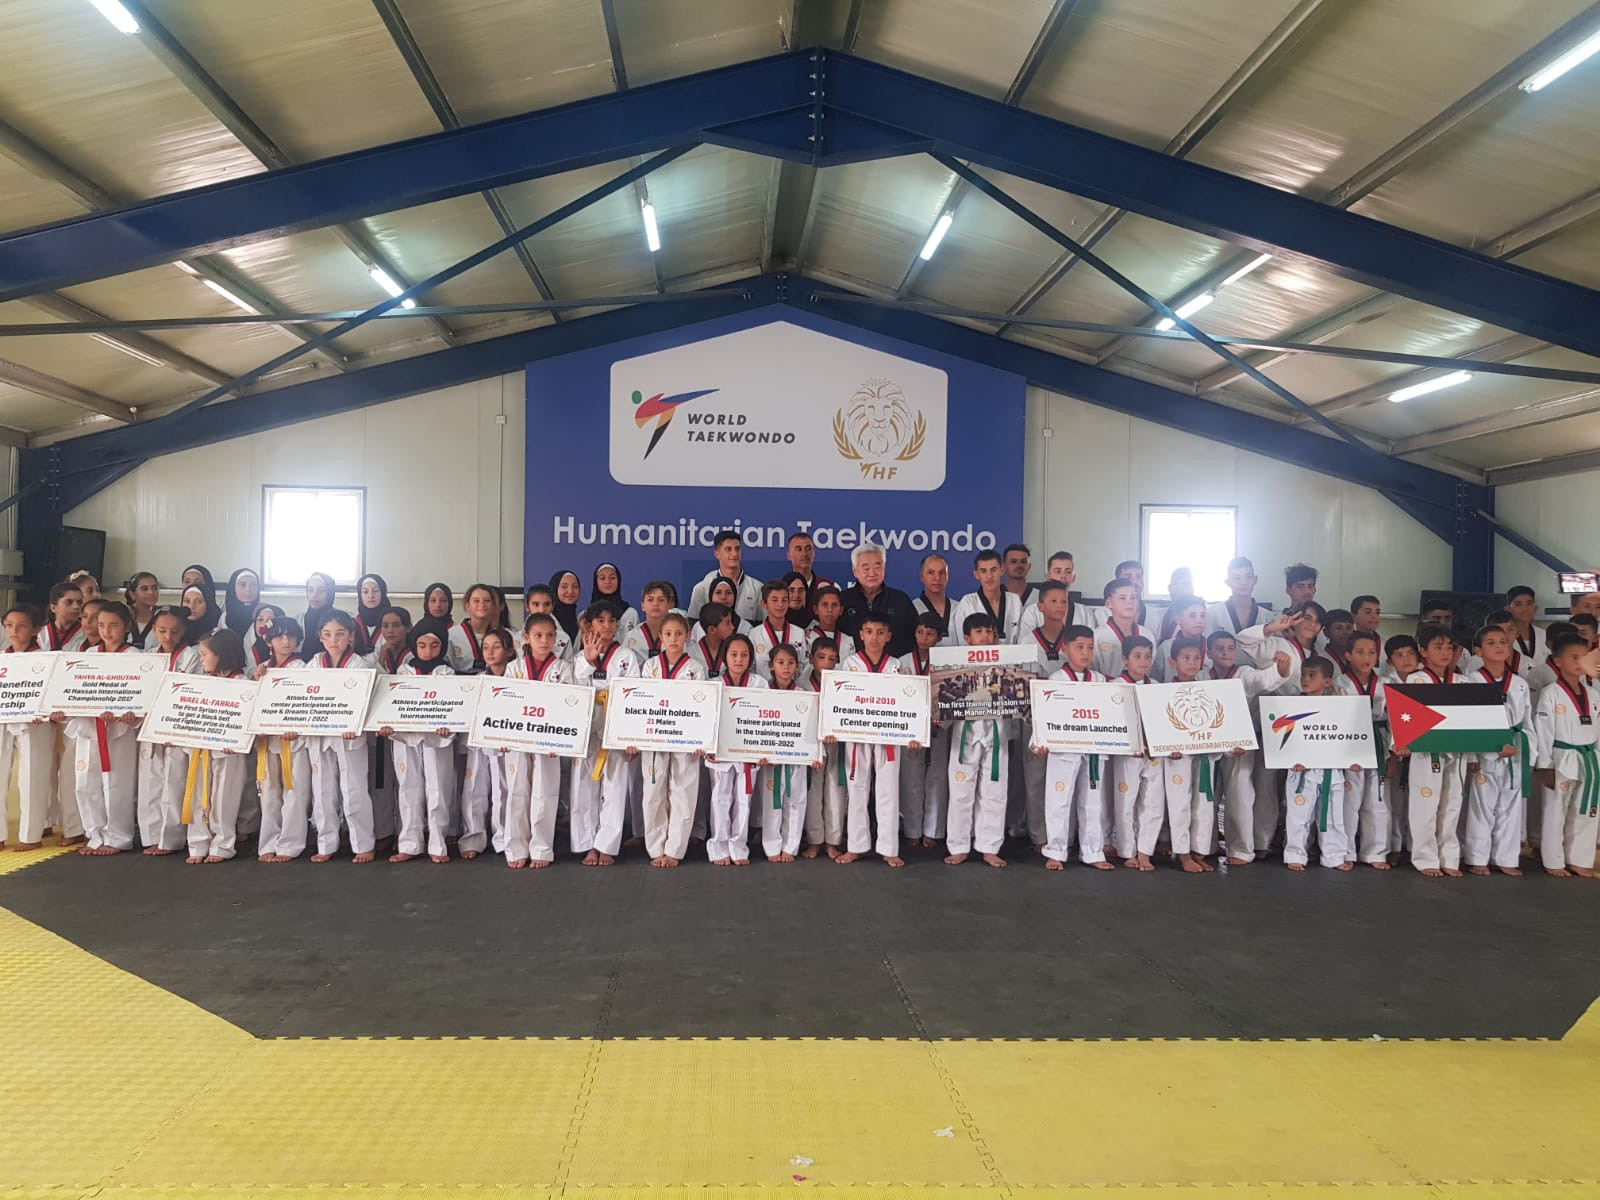 Chungwon Choue has visited the Azraq Refugee Camp for the first time since the start of the COVID-19 pandemic ©World Taekwondo